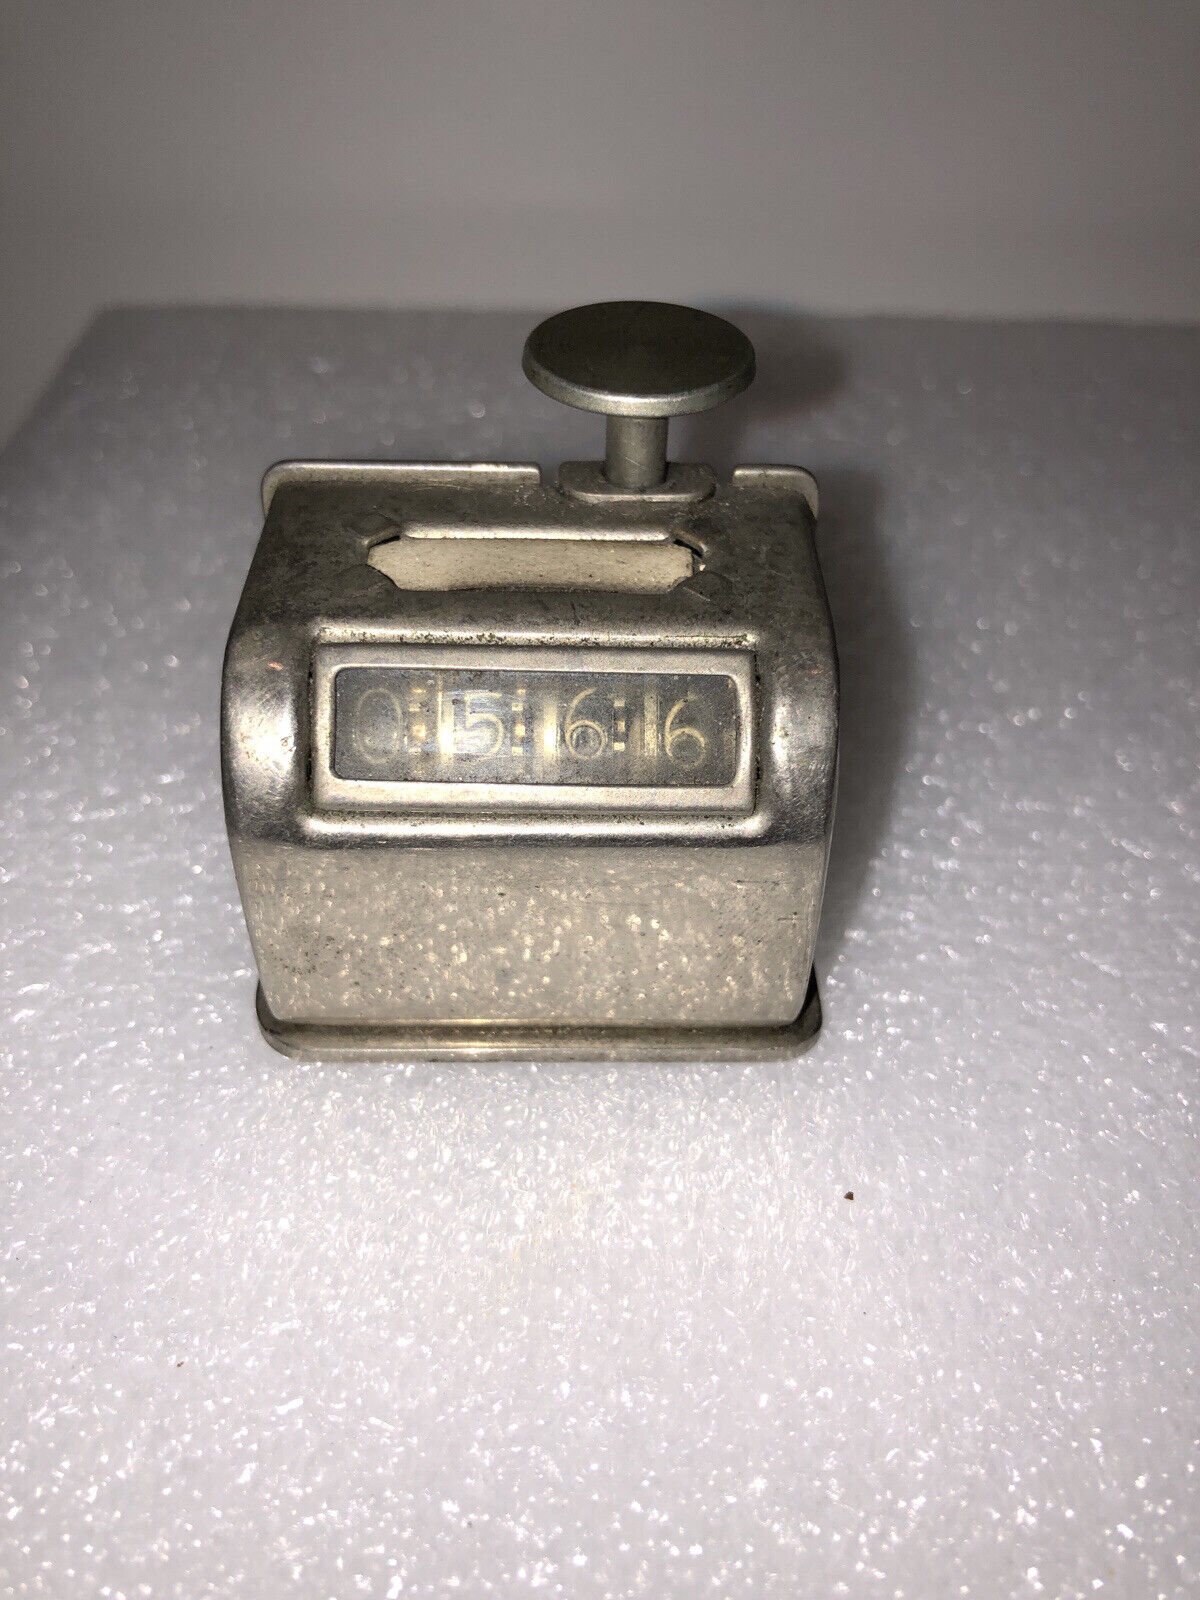 Antique Railway Conductor’s Handheld Tally Counter.